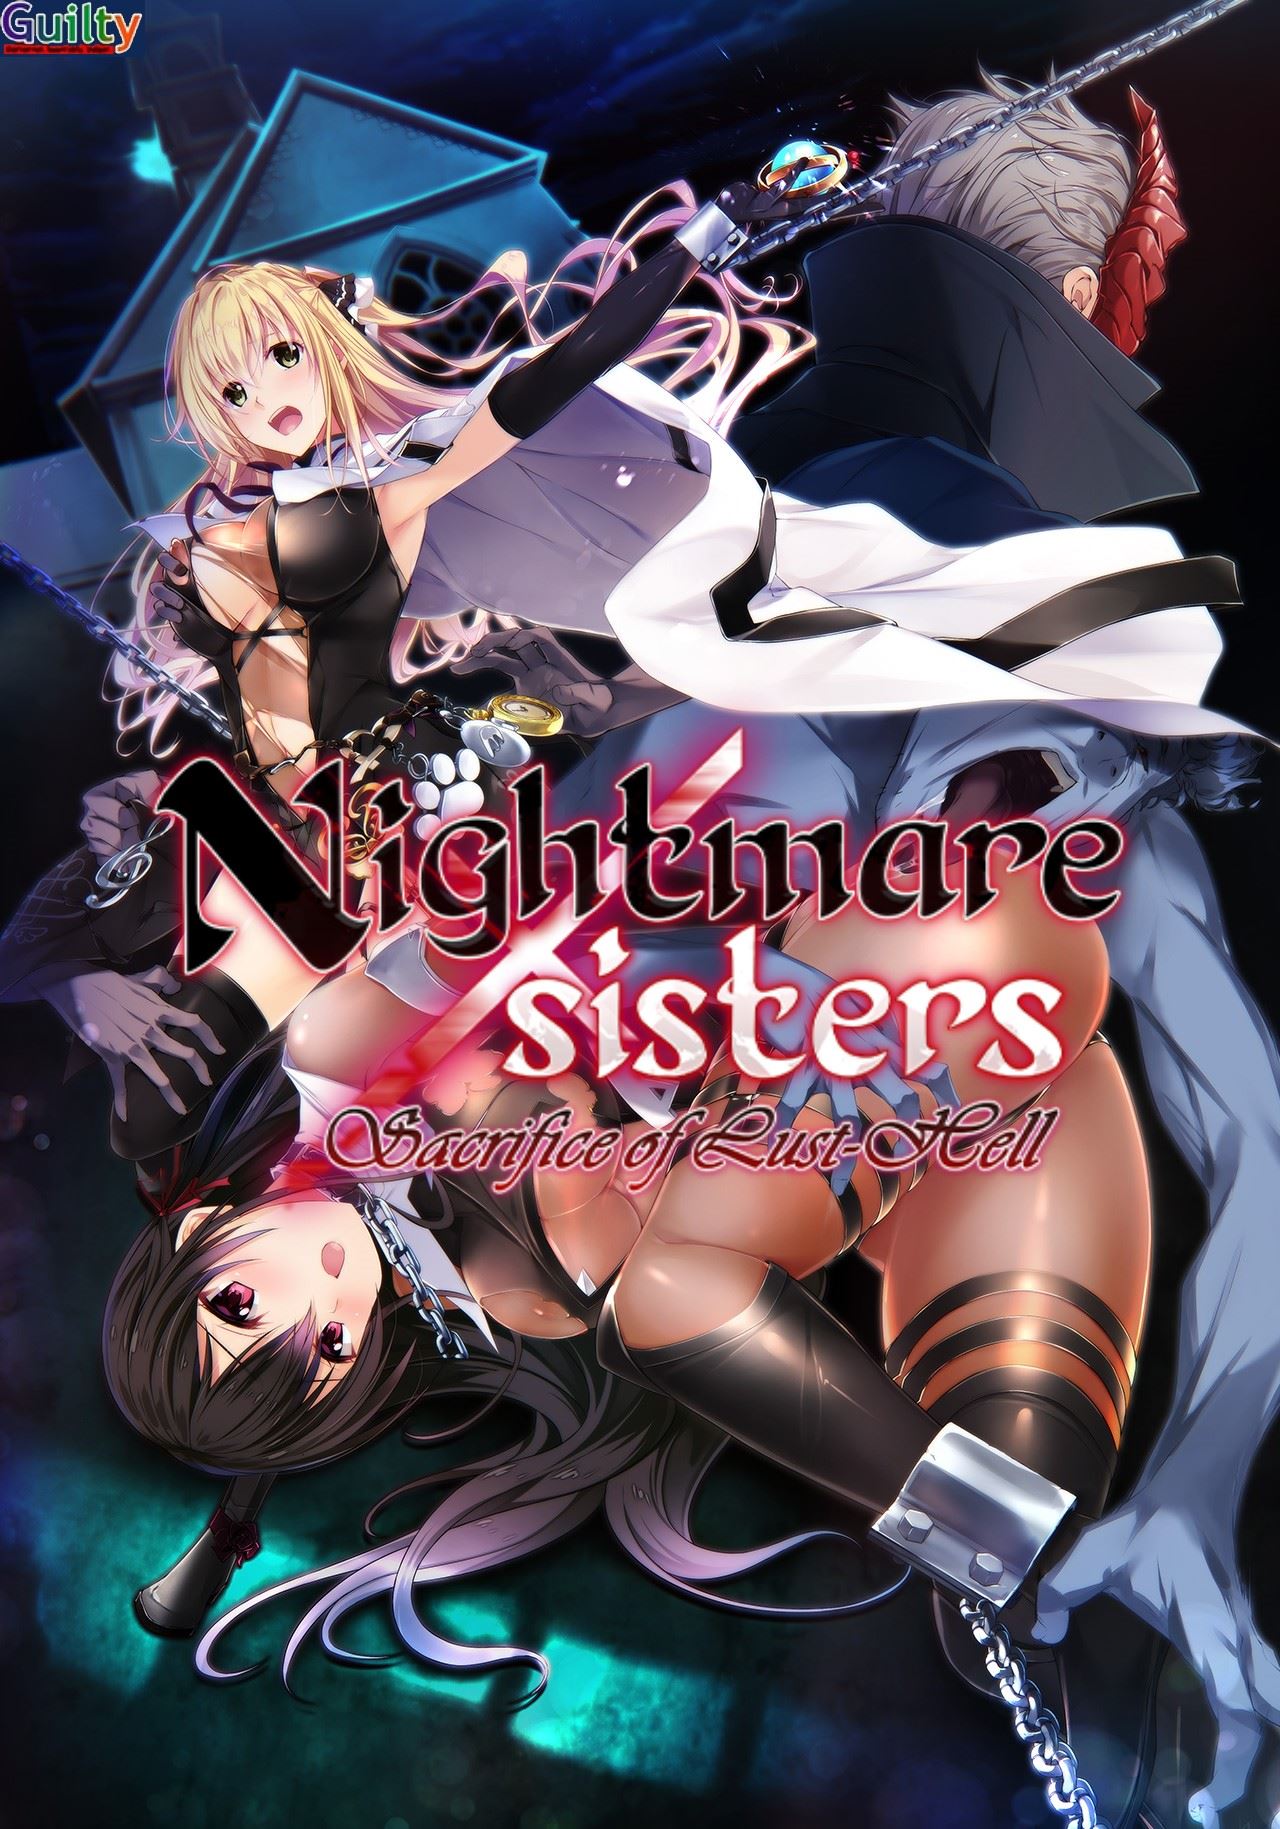 Nightmare x Sisters – Sacrifice of Lust-Hell porn xxx game download cover